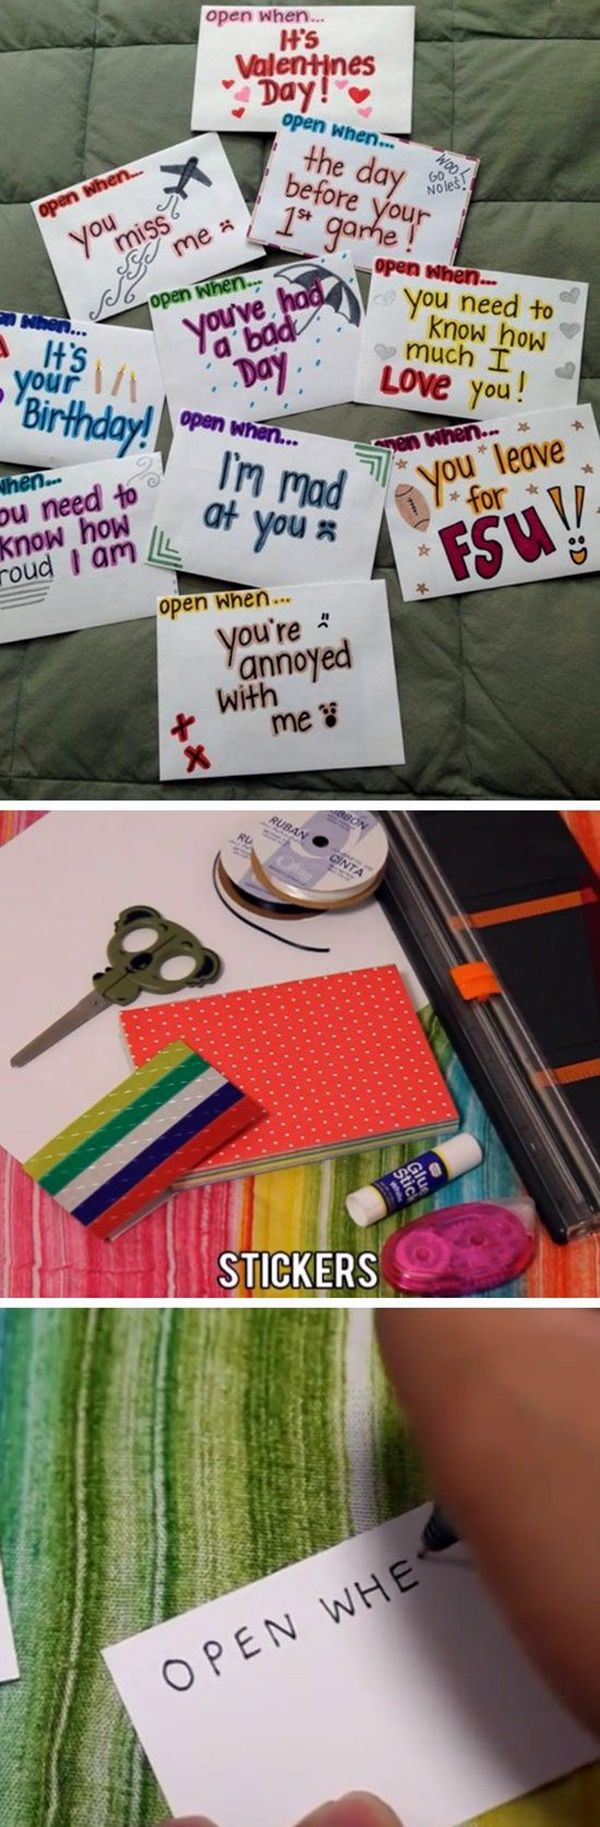 Last Minute Birthday Gift Ideas For Boyfriend
 101 Homemade Valentines Day Ideas for Him that re really